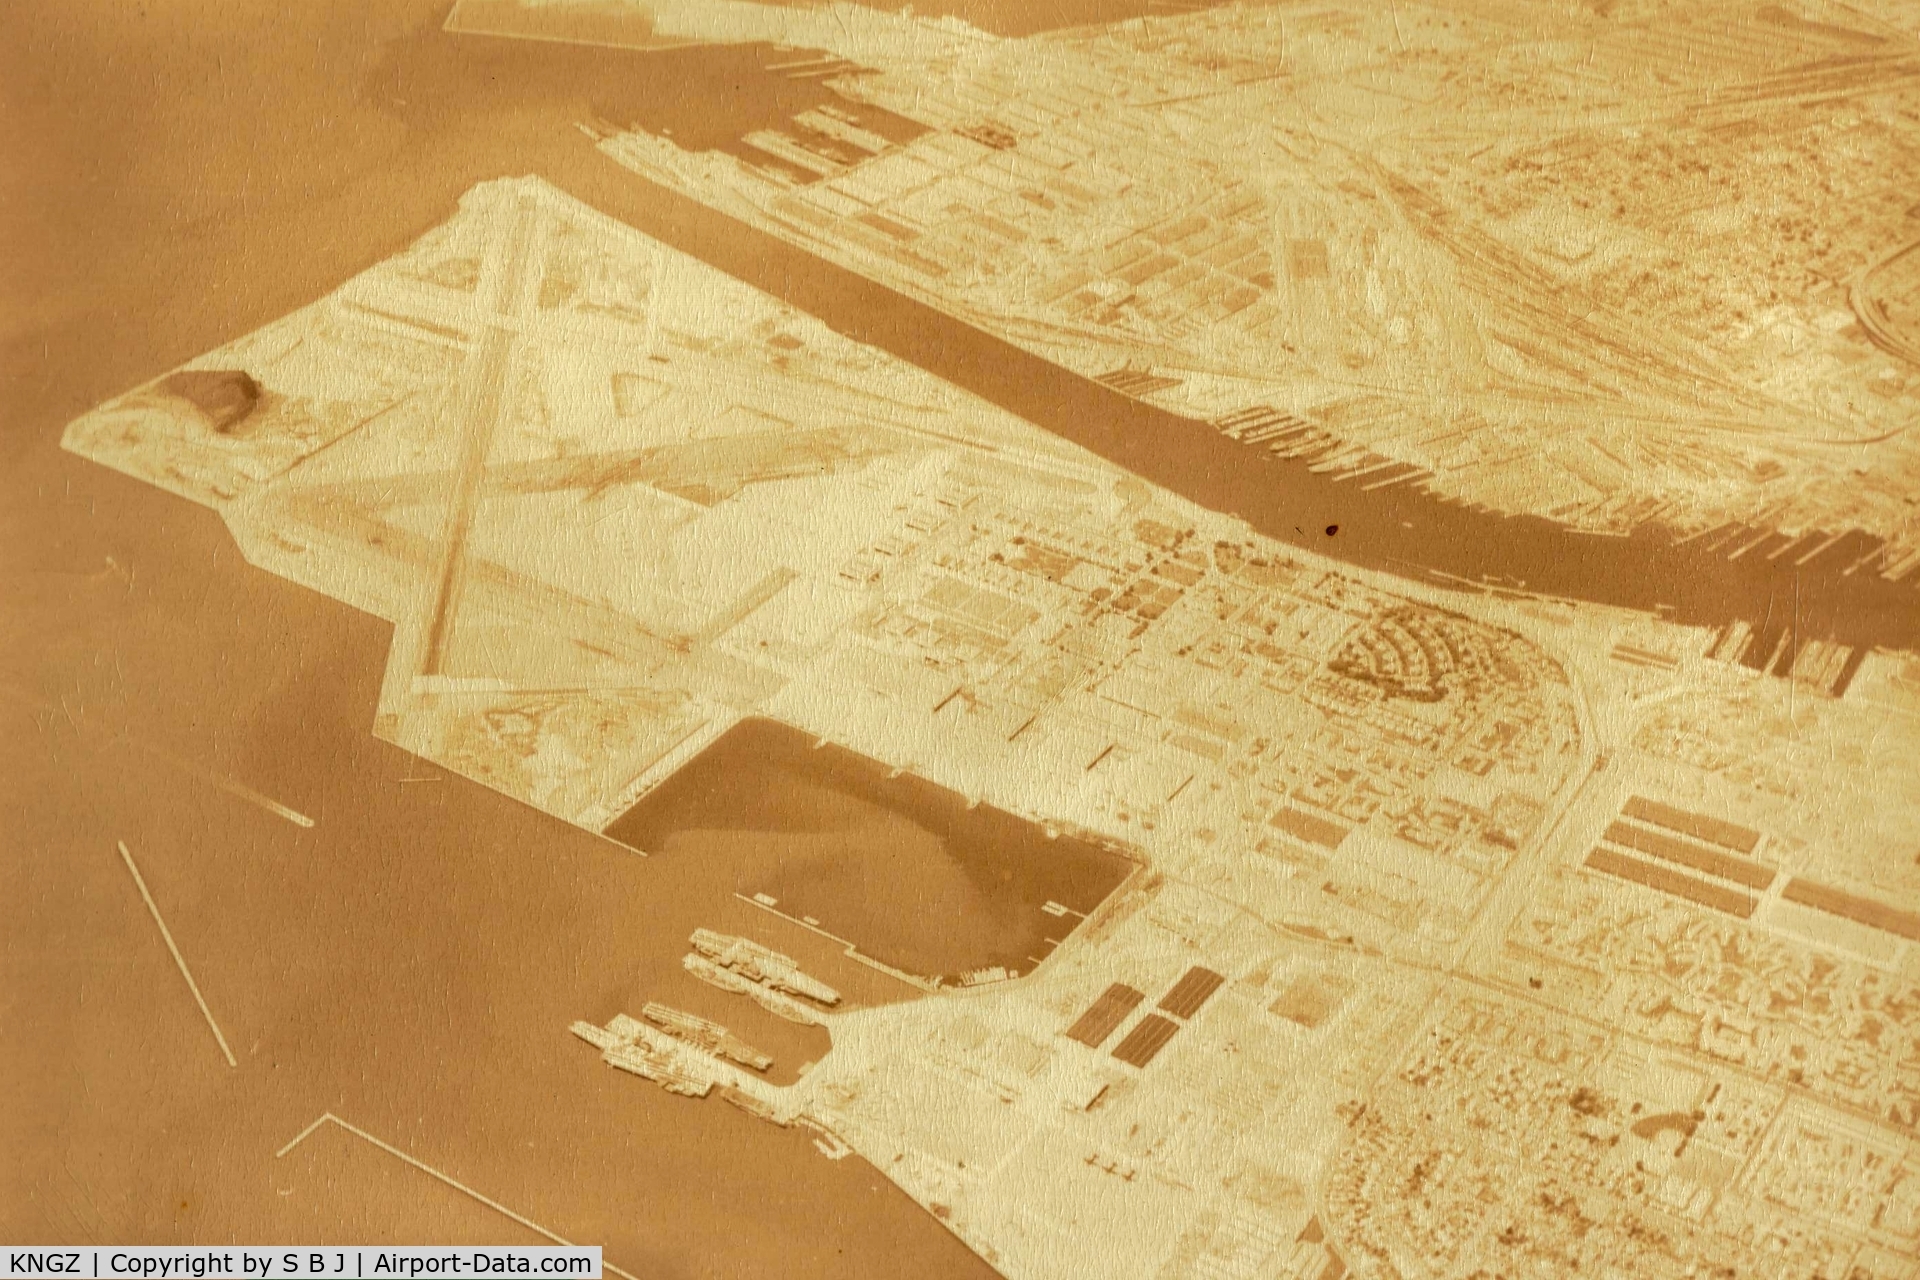 NGZ Airport - Alameda around 1955-60 when the SF Bay Area had a heavy military presence. Is the 3 carriers at the bottom of picture where the Doolittle Raiders put on the carrier Hornet?